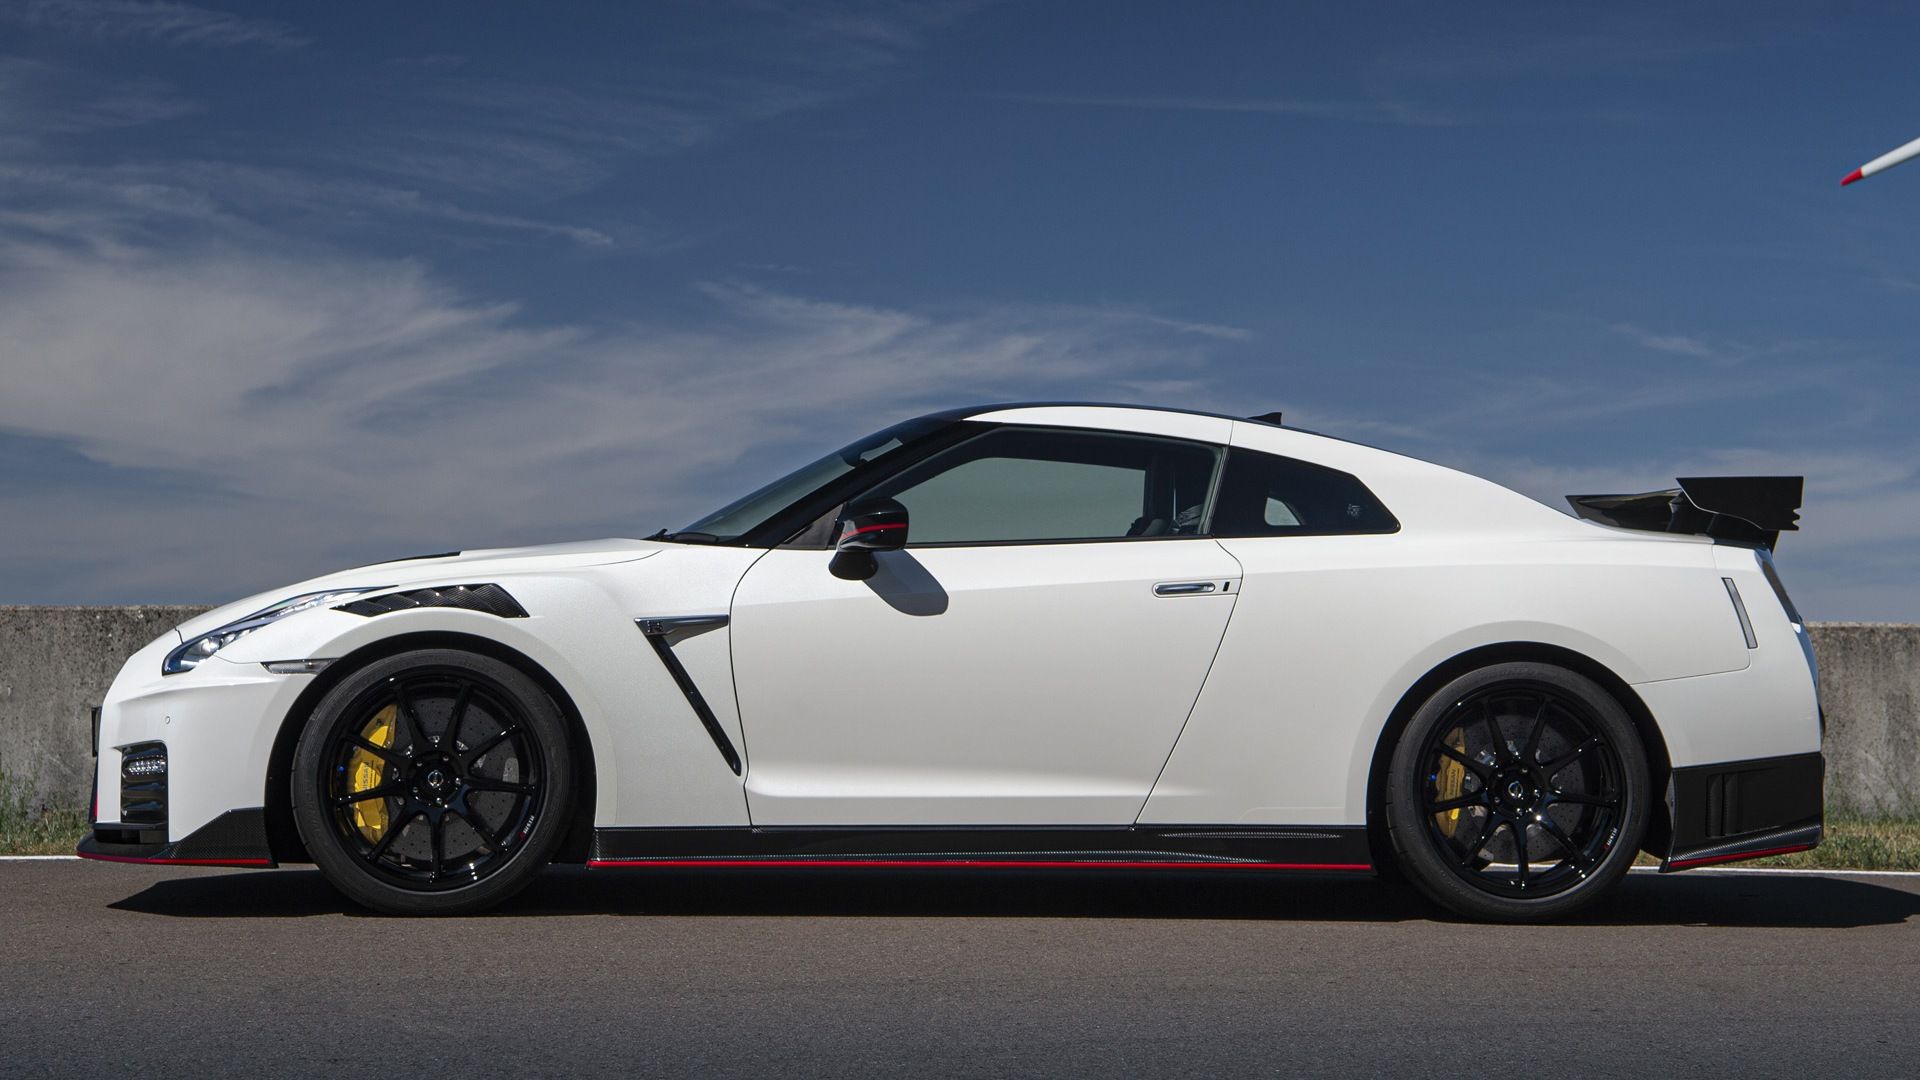 2021 Nissan GT-R parked outside